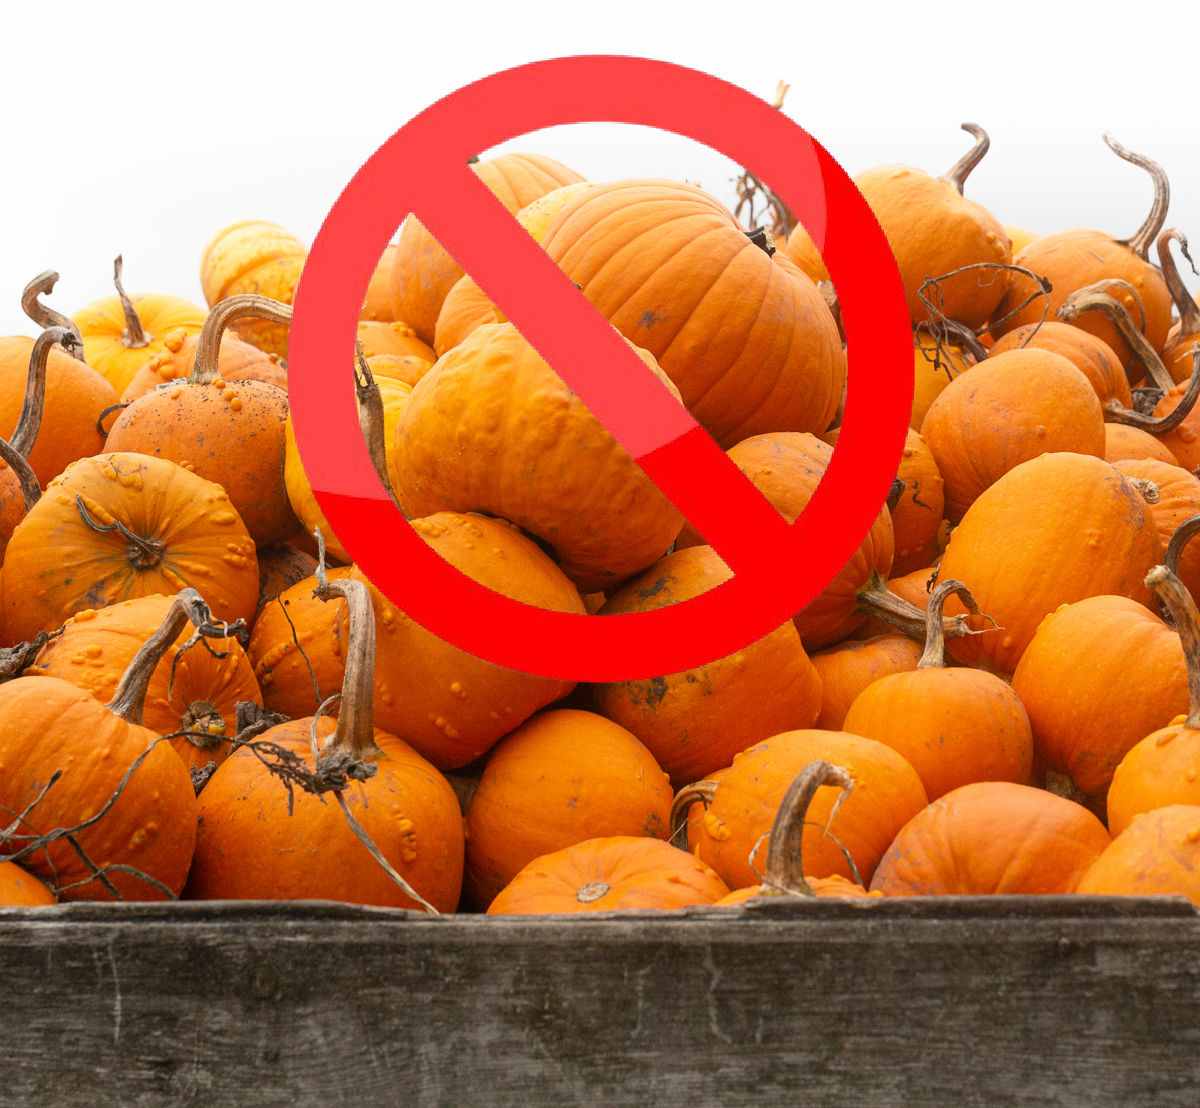 Stacked pumpkins with a no sign superimposed on them.